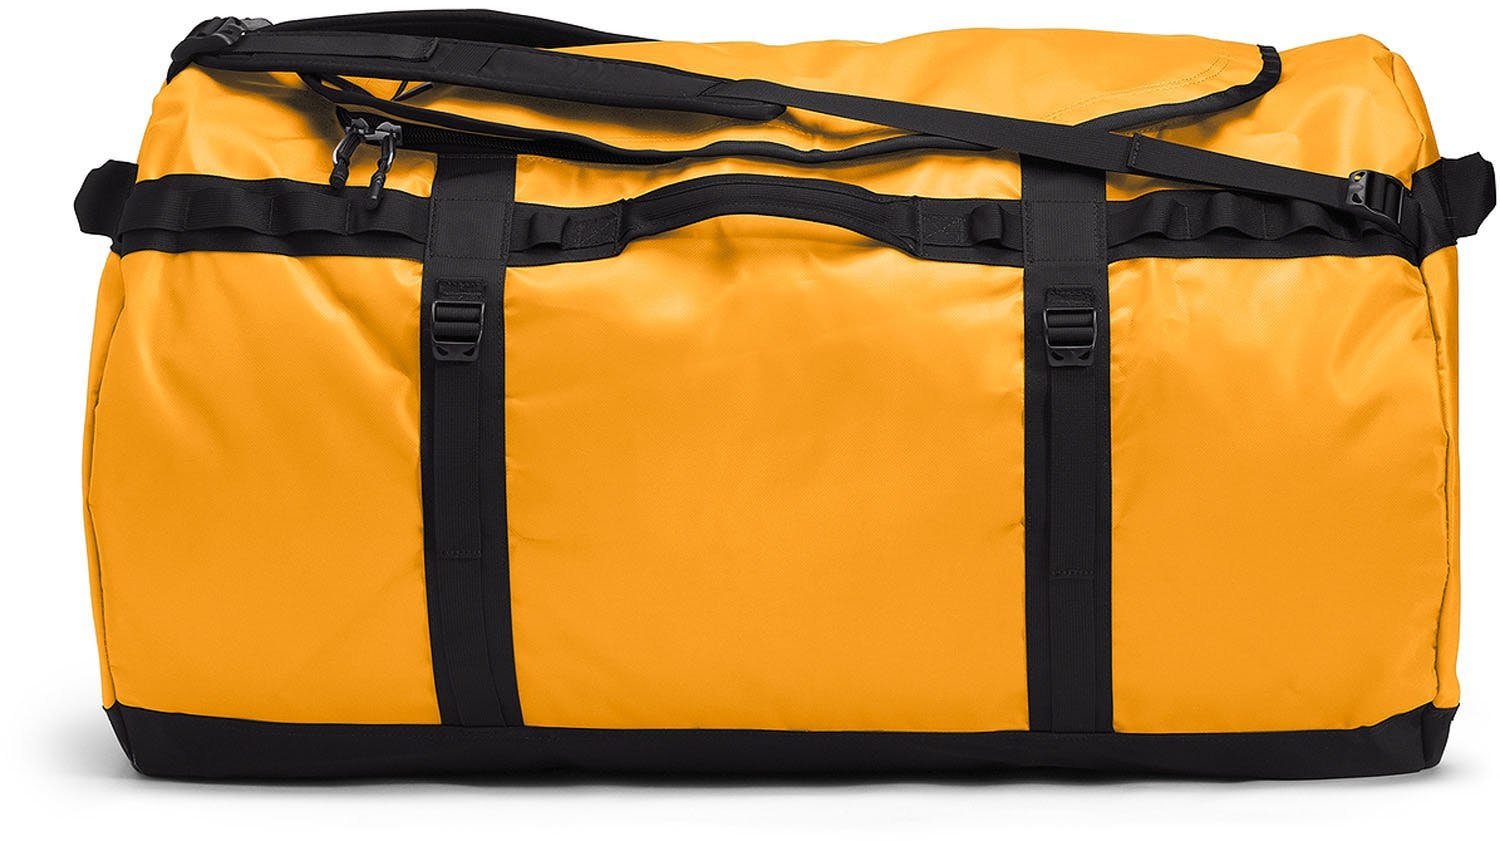 Product image for Base Camp Duffel Bag - XXL 150L